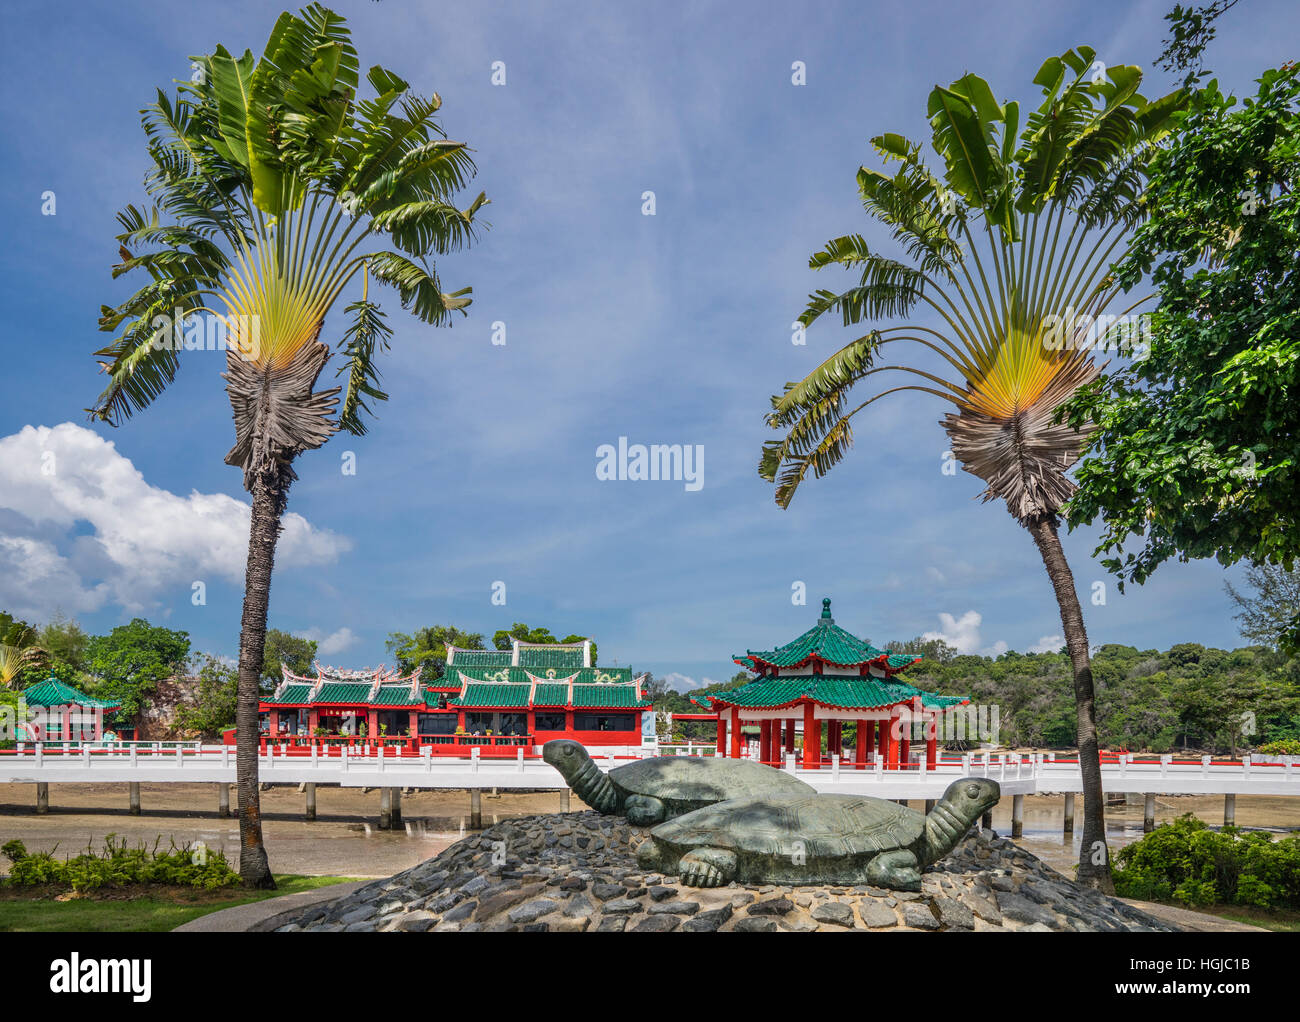 Singapore, tortoise sculpture at the chinese temple of Kusu Island, also known as Tortoise Island. Stock Photo